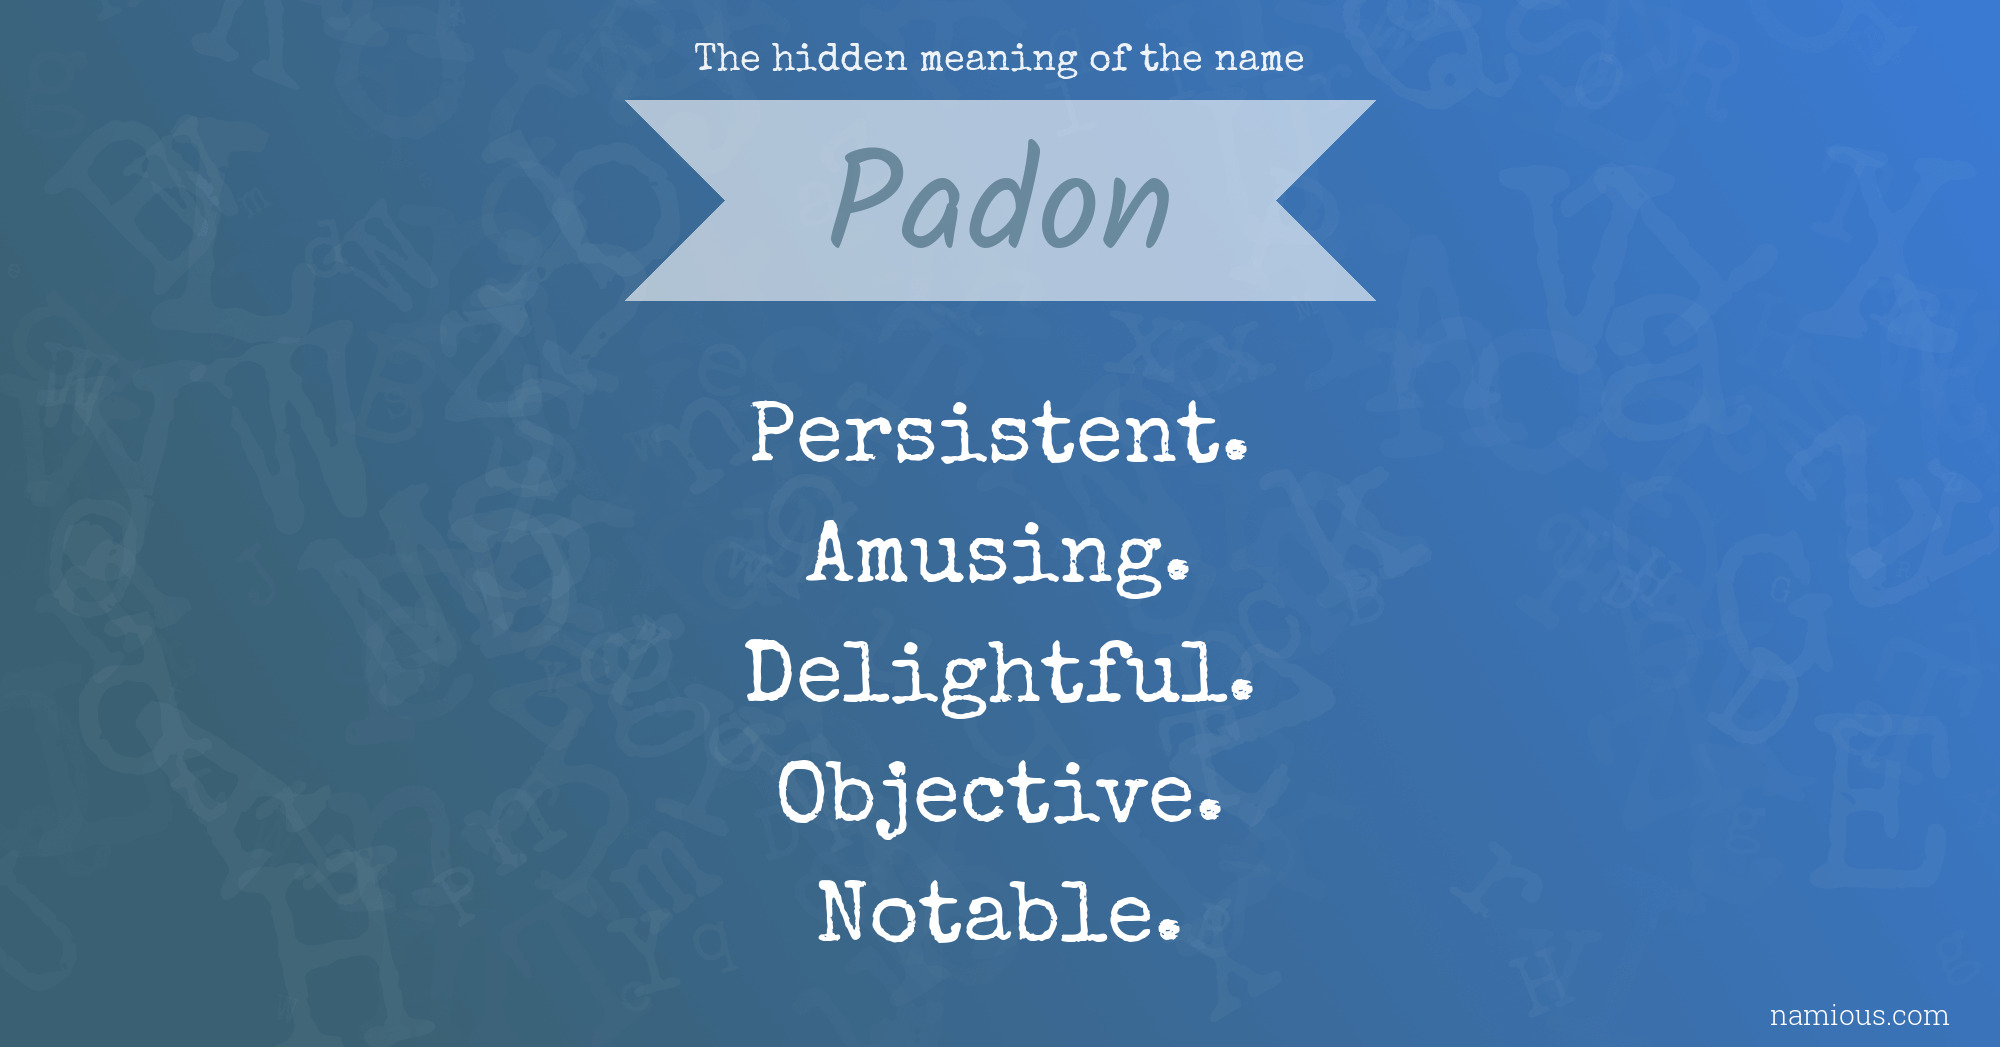 The hidden meaning of the name Padon